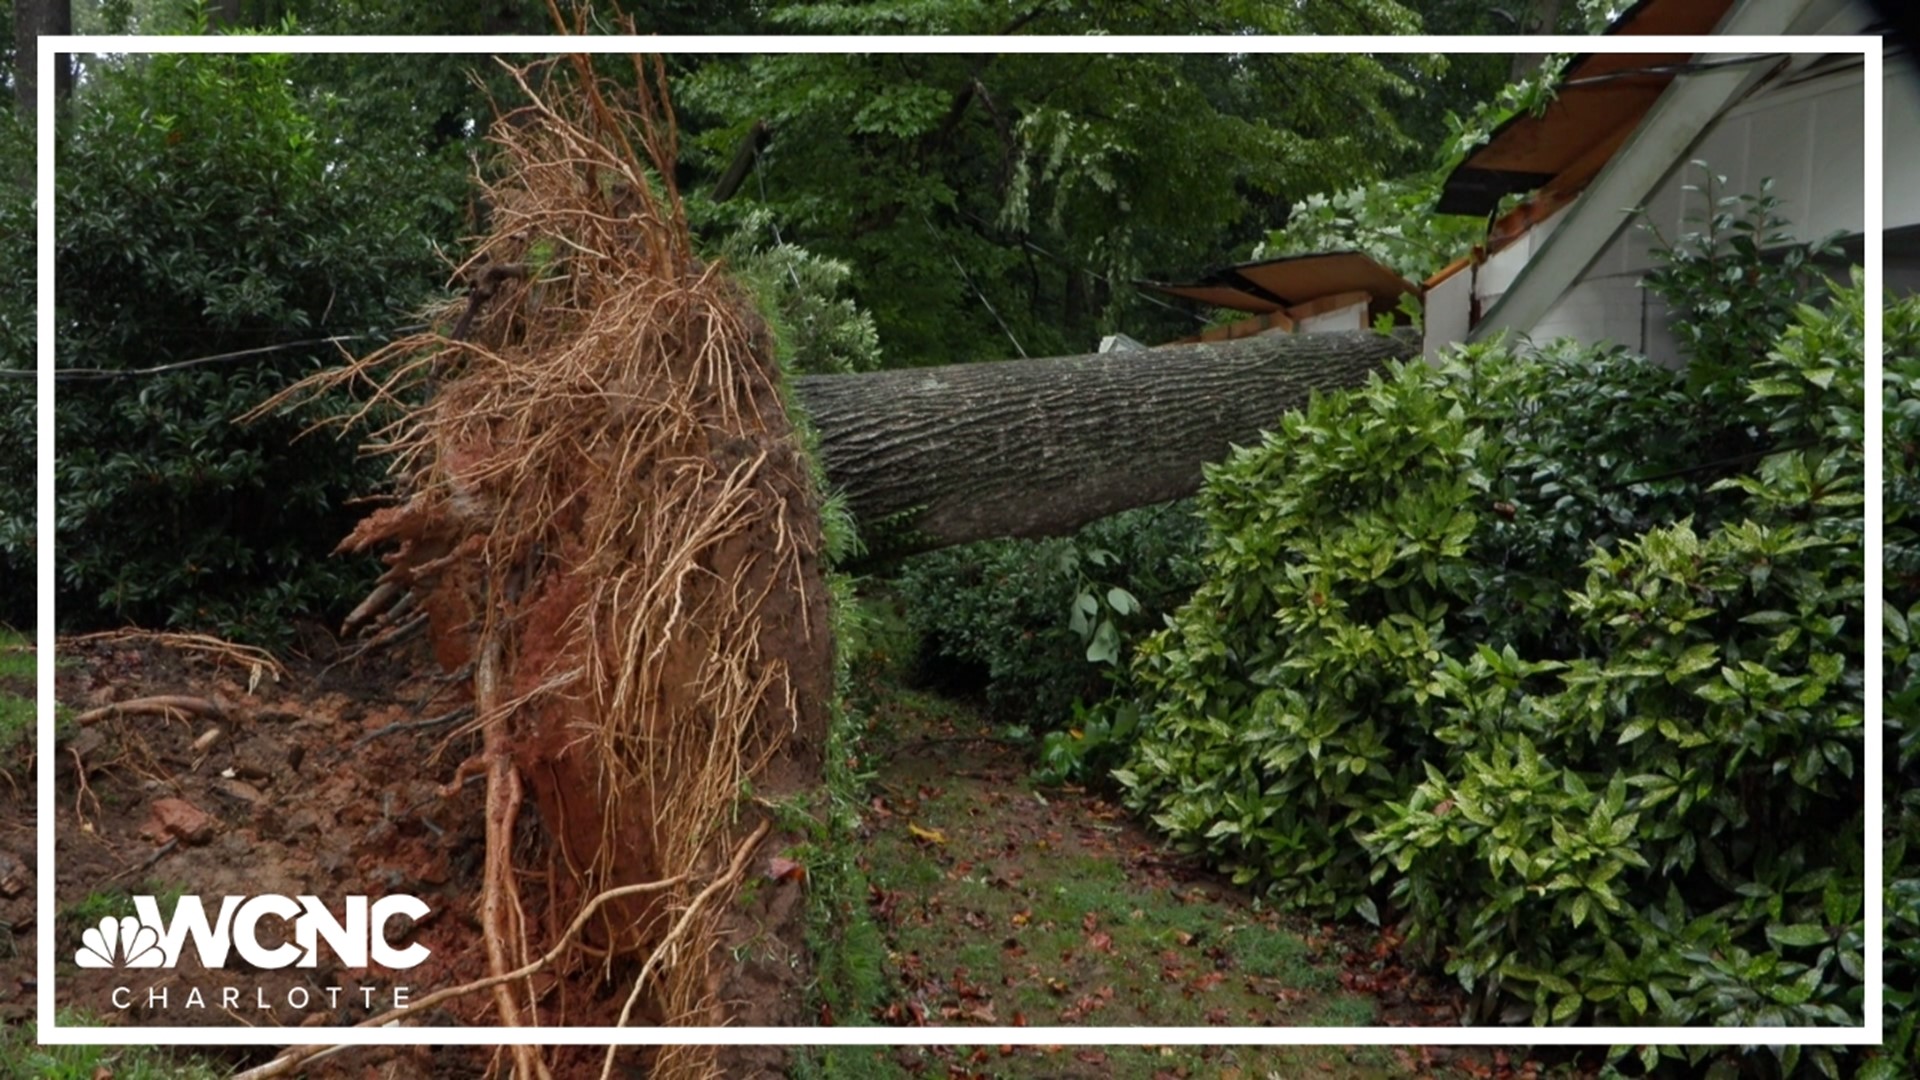 After this week's round of storms, homeowners are advised to be on the lookout for scammers.